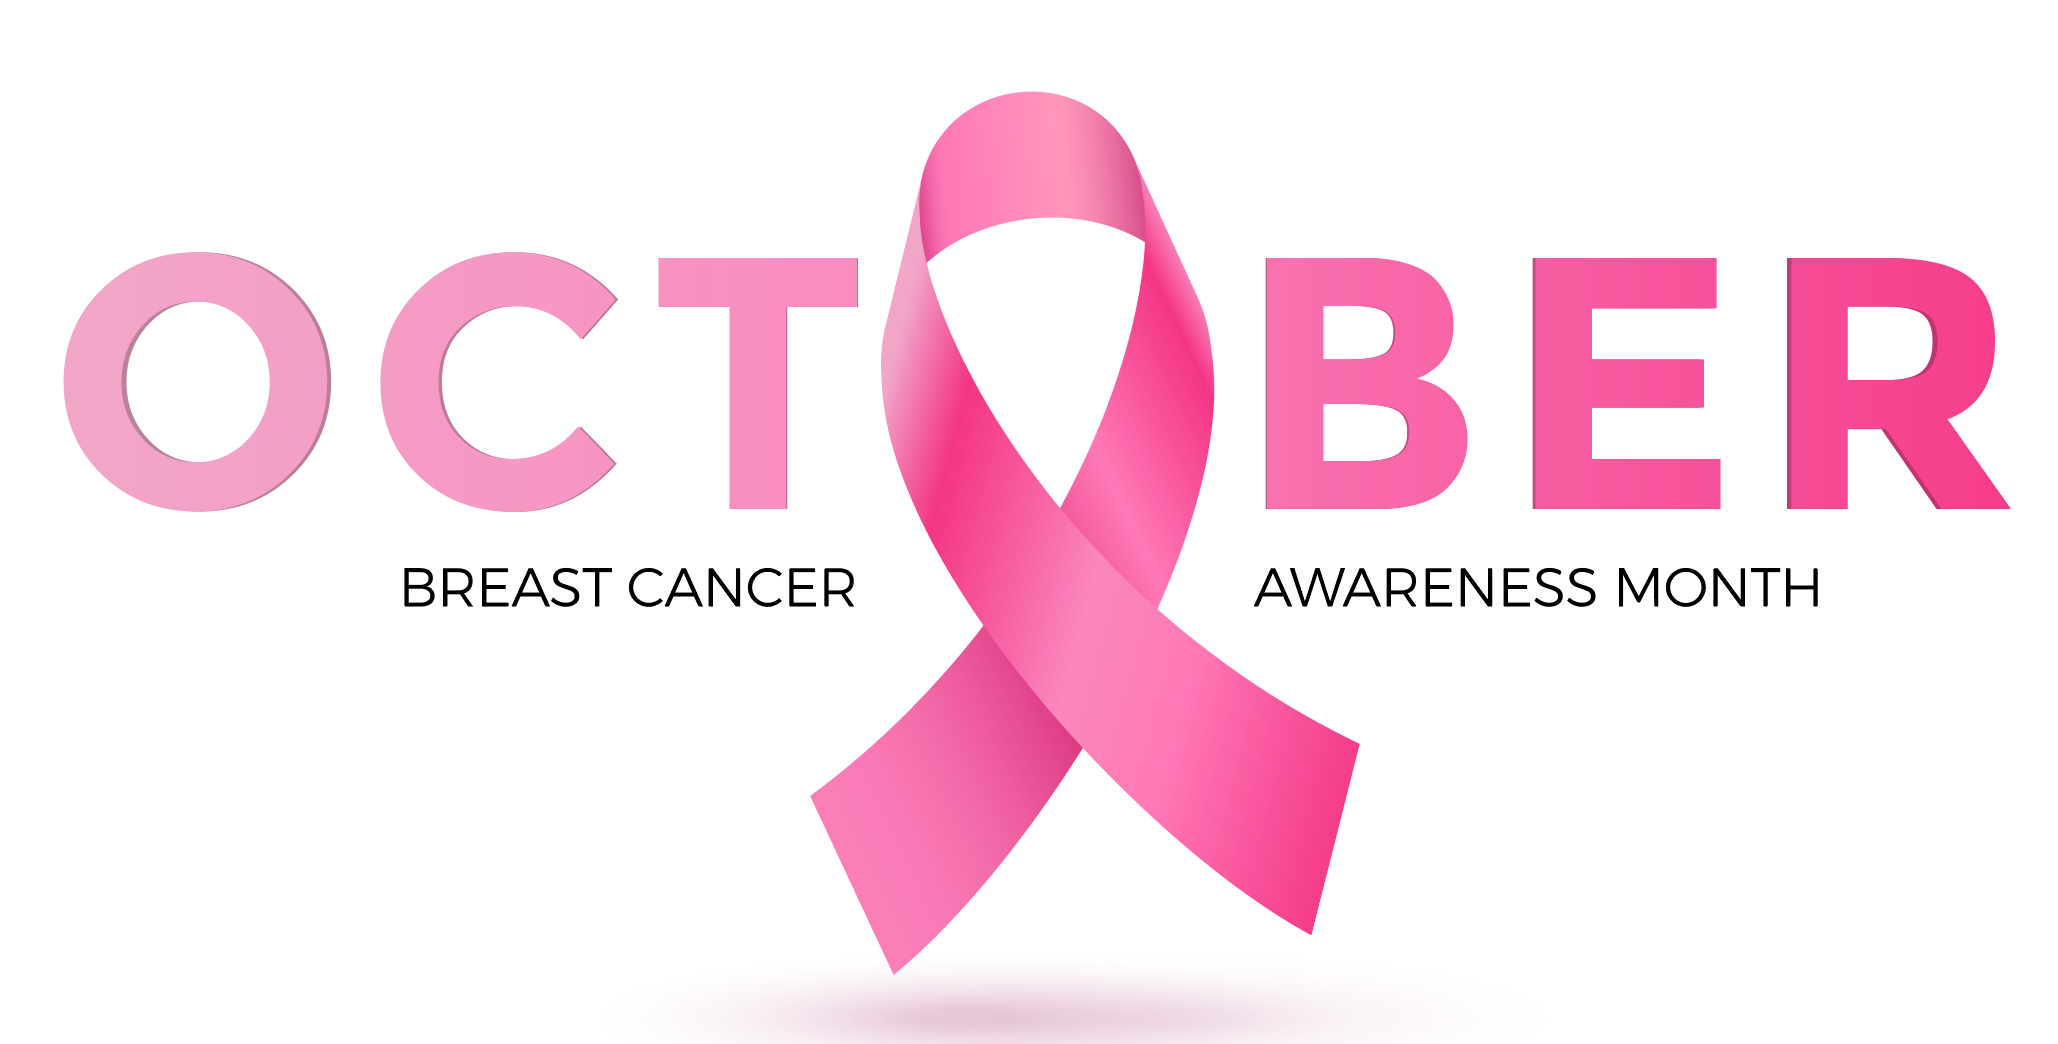 Breast Cancer Awareness Month in October